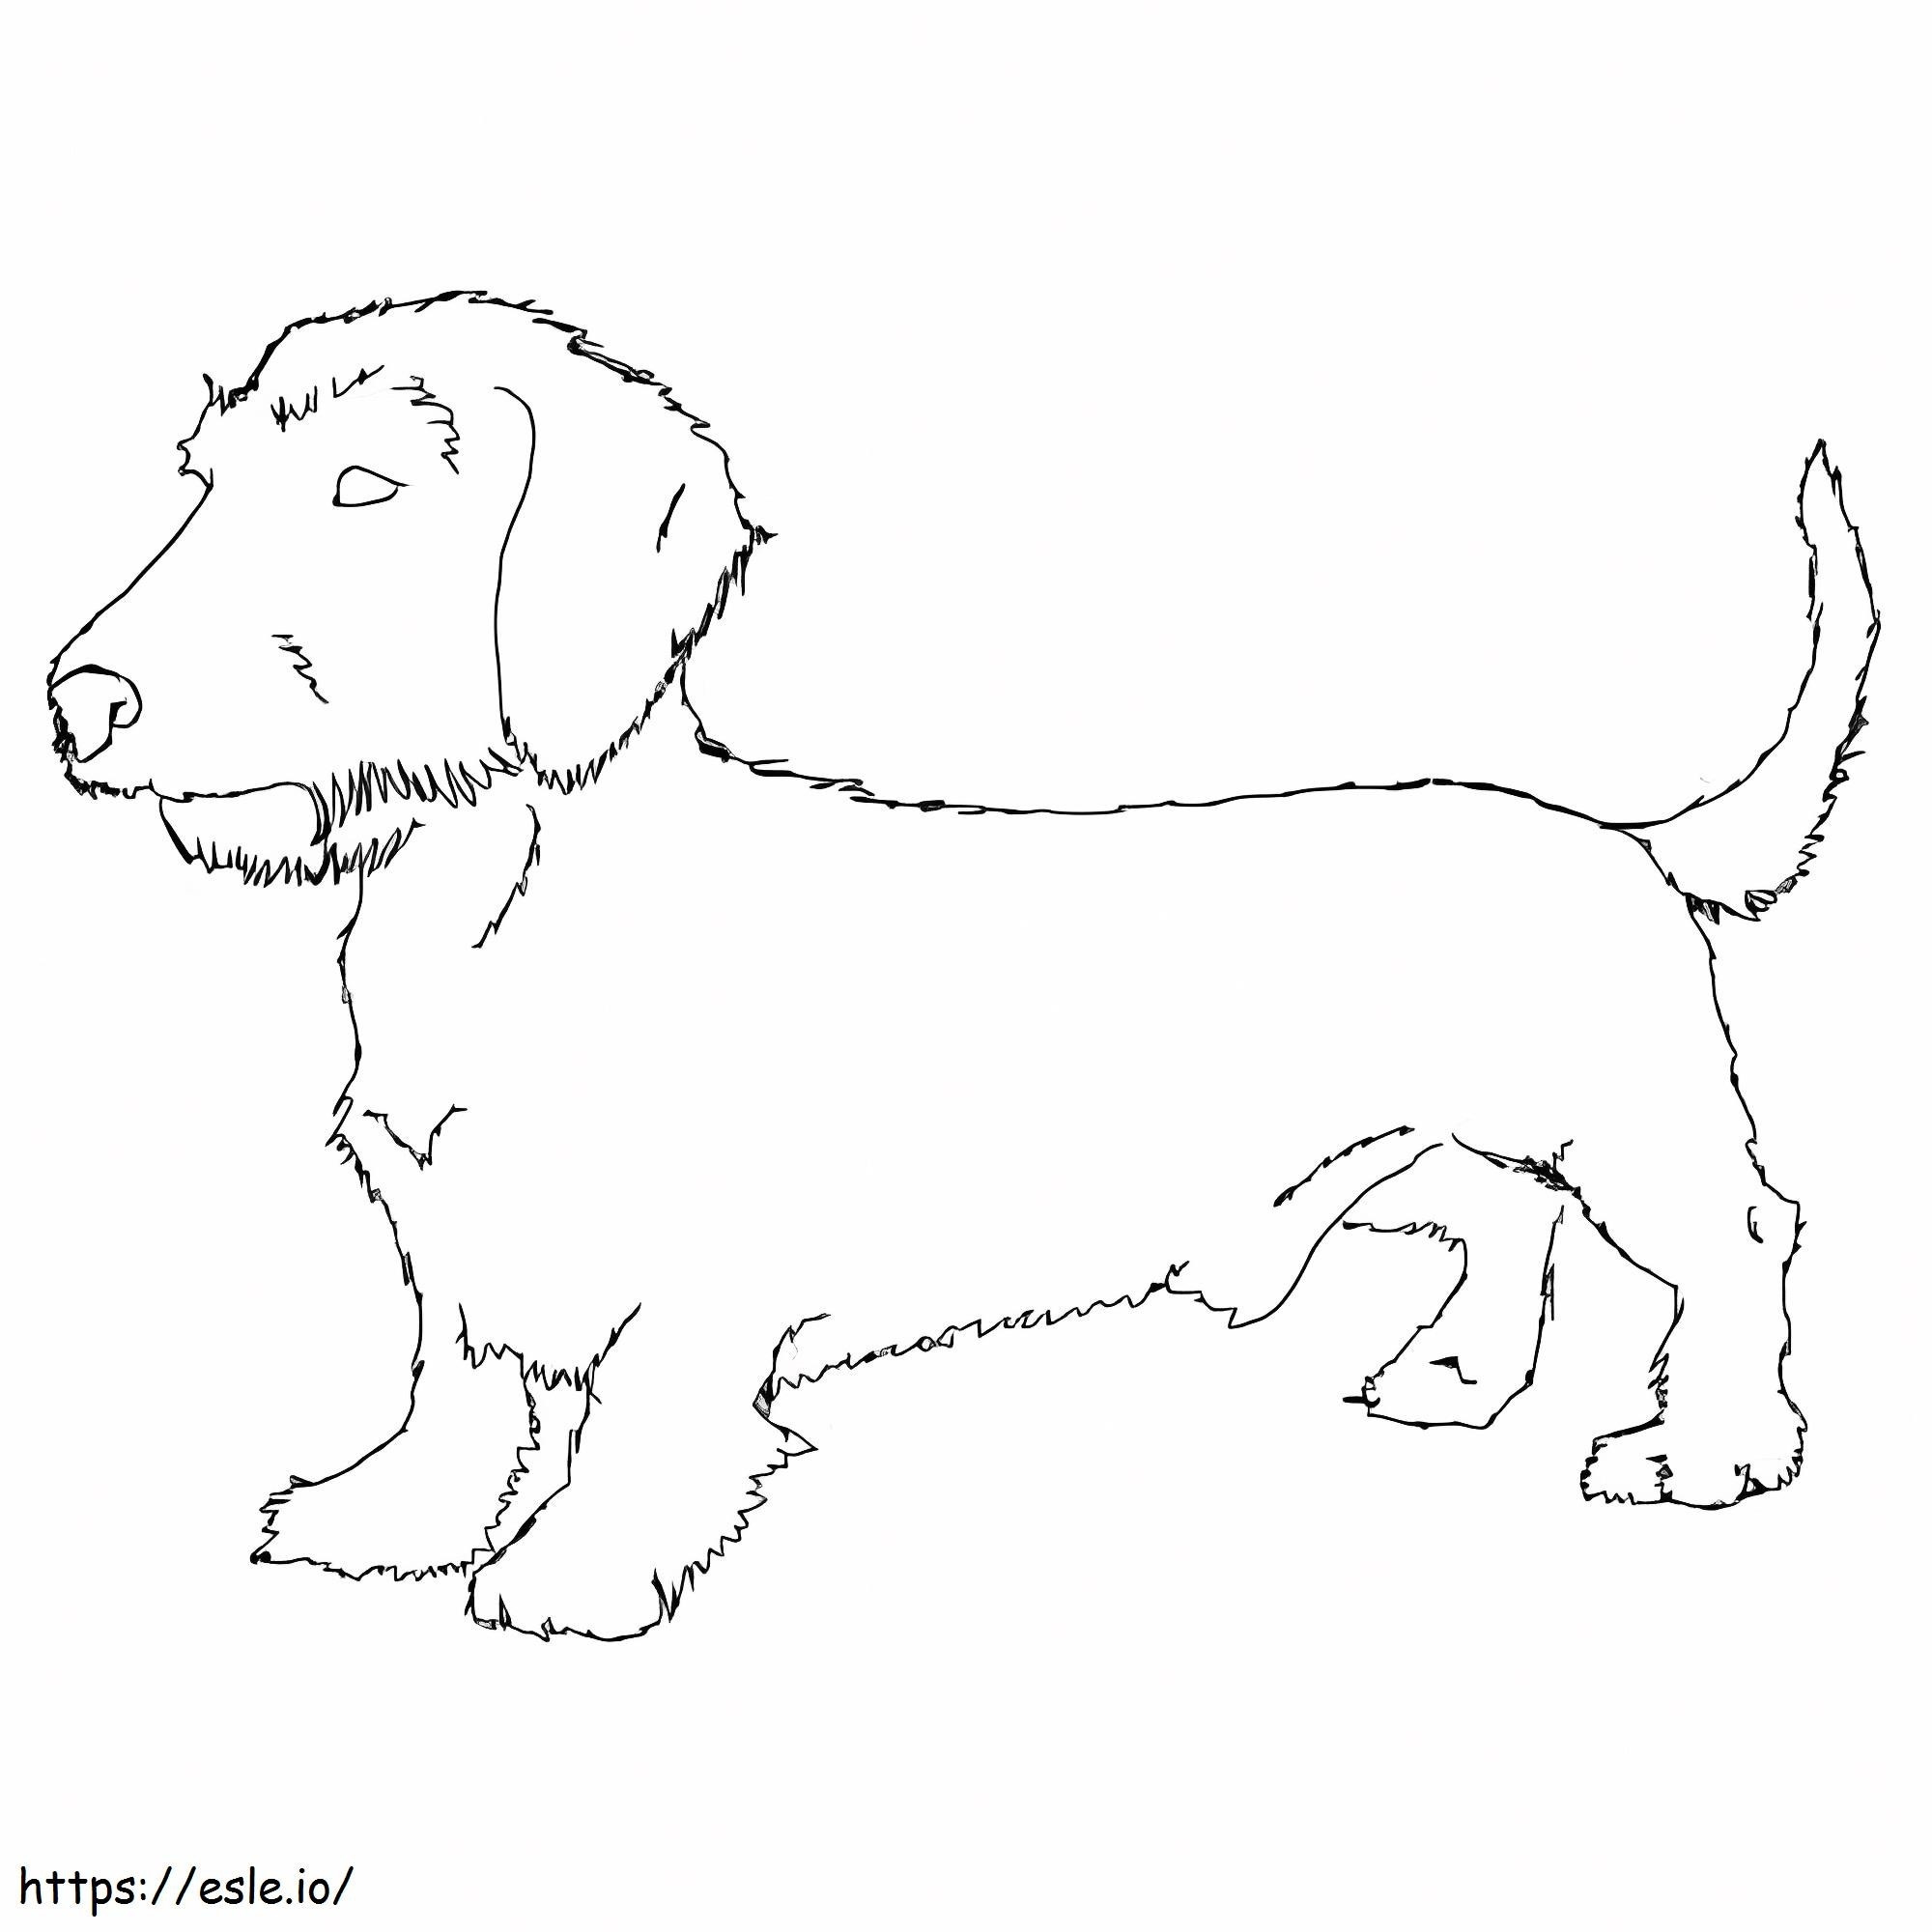 Wirehaired Dachshund coloring page